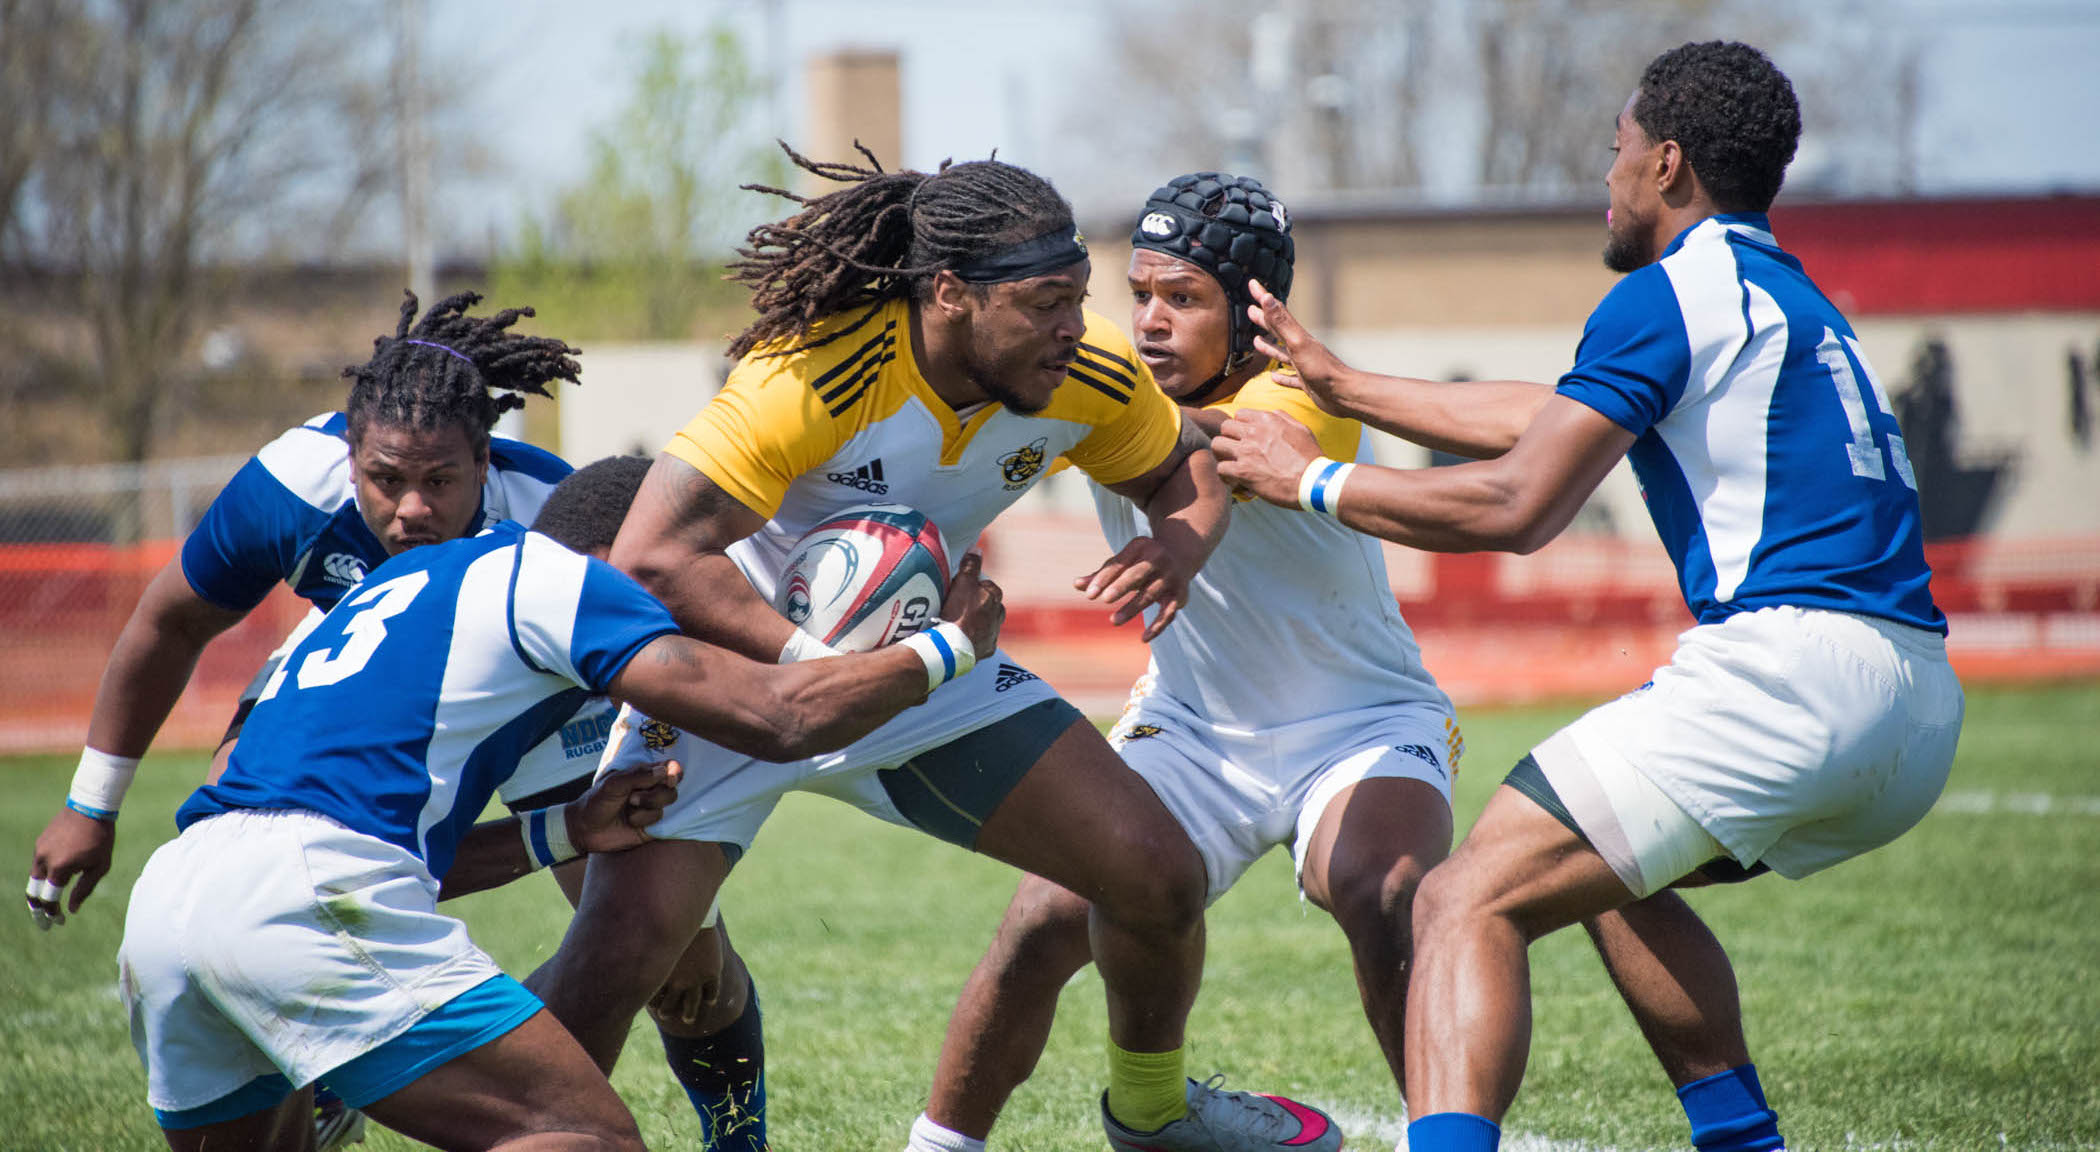 Christian Adams in action for AIC Rugby. Spring 2016. Kevin Mercer photo.